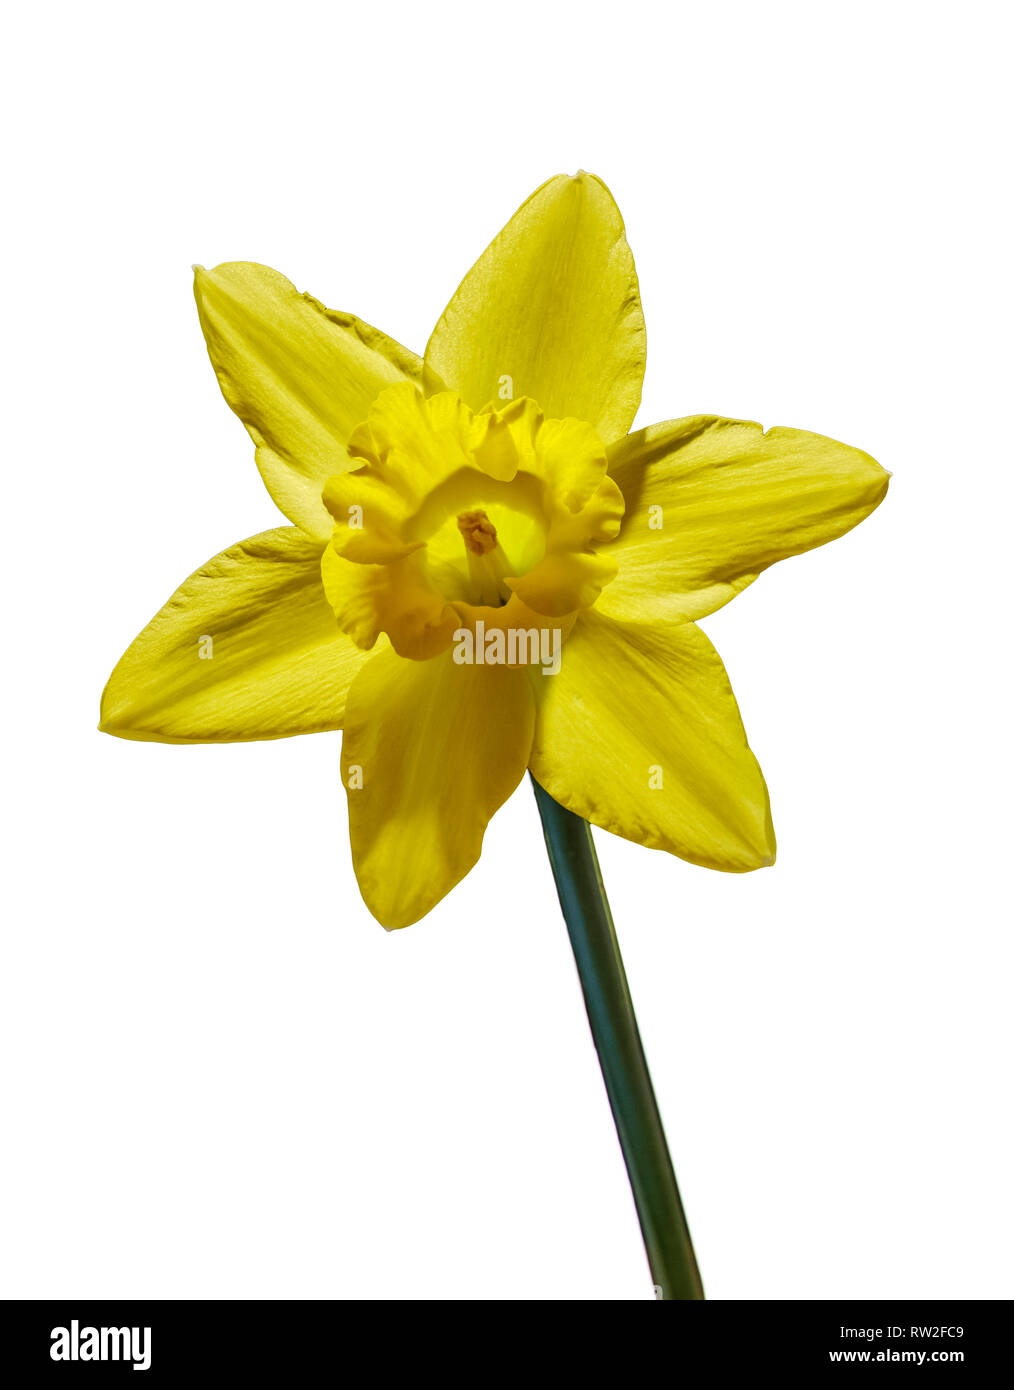 SINGLE DAFFODIL FLOWER ON CLEAR BACKGROUND. Stock Photo